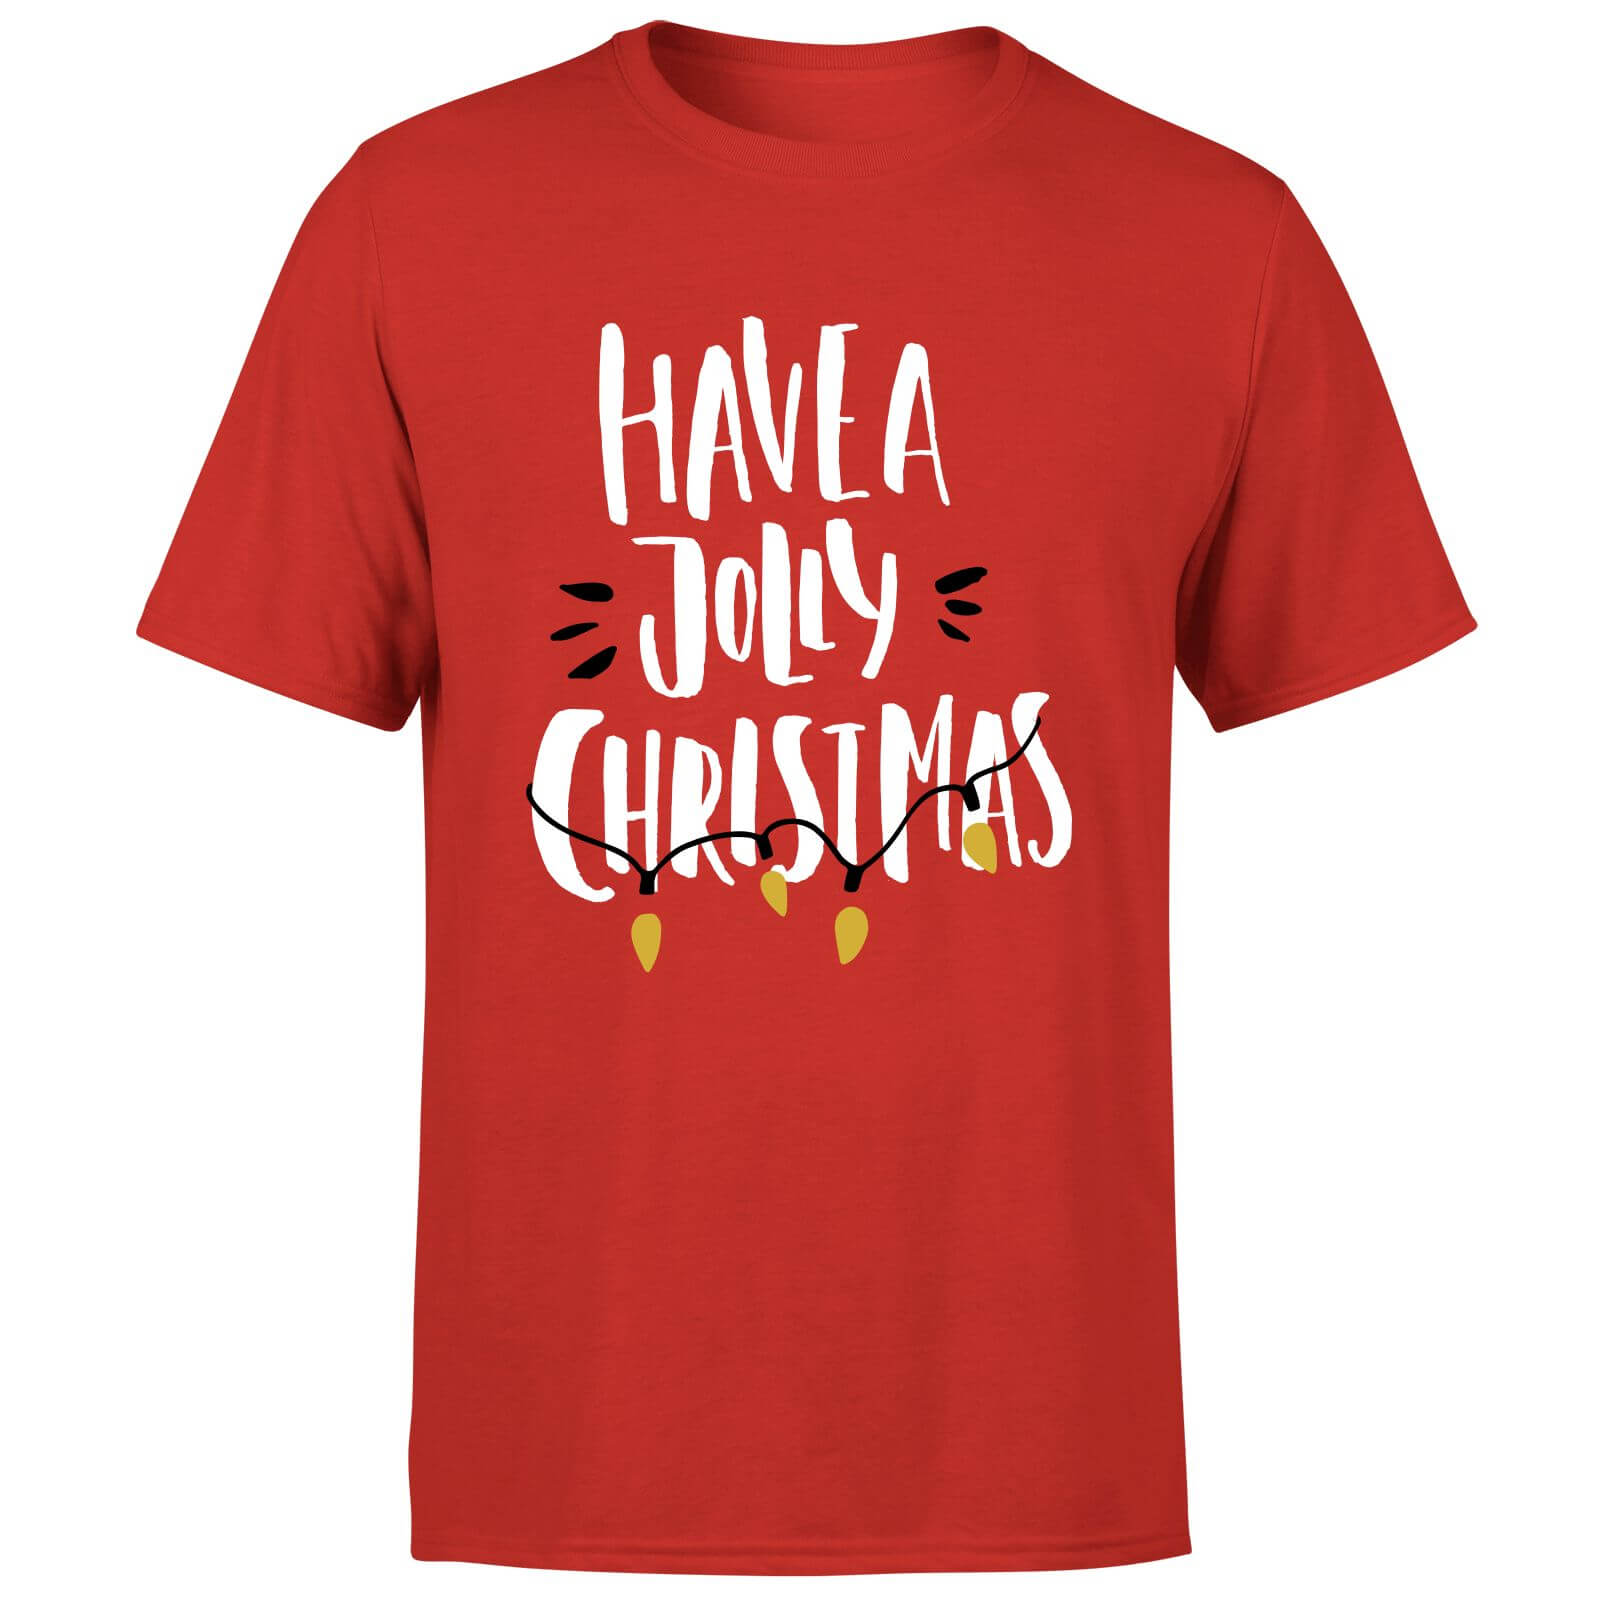 Have a Jolly Christmas T-Shirt - Red - S - Red